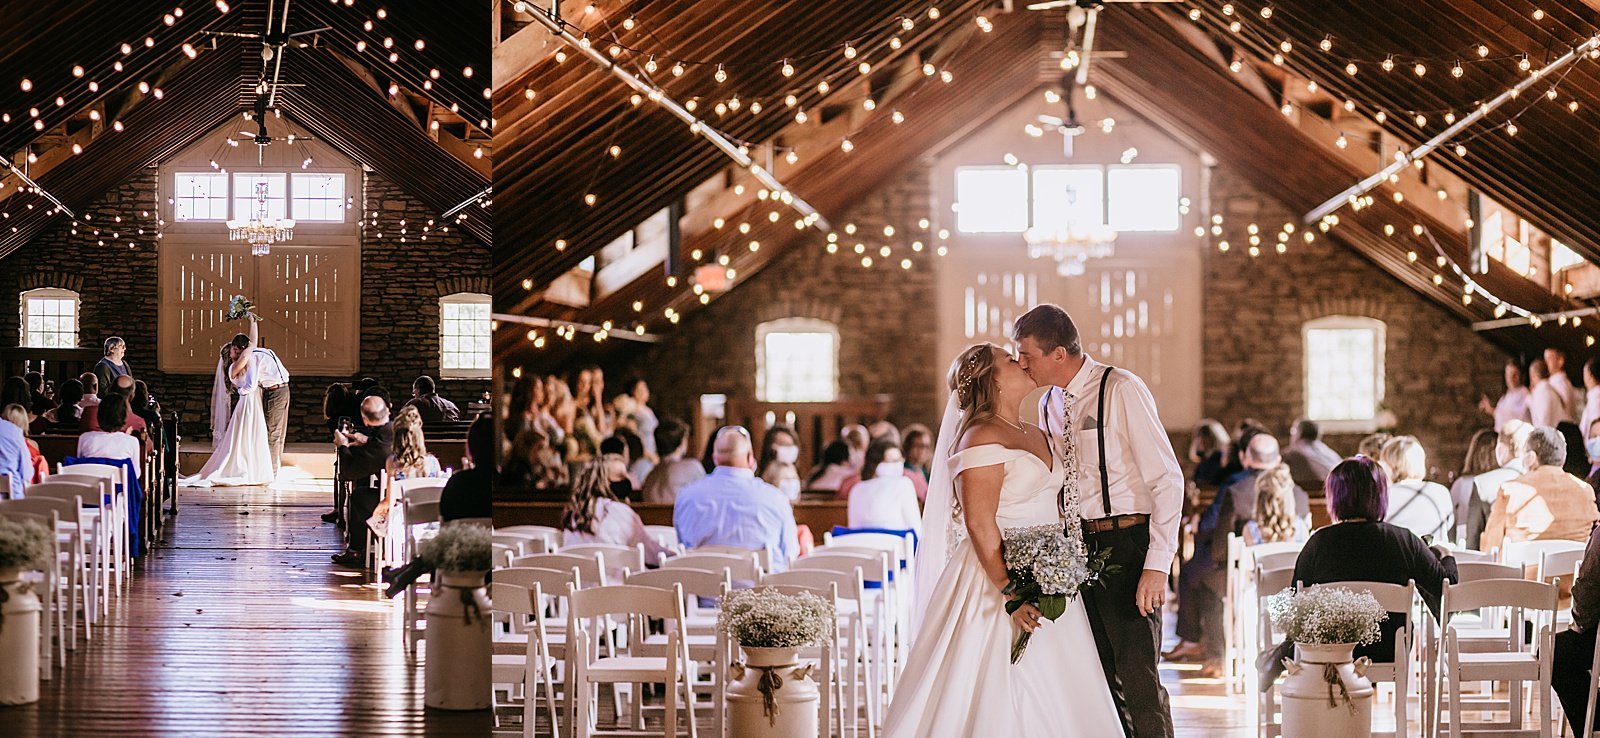  Newlyweds kissing at the end of the aisle in a barn with twinkle lights for a rustic wedding 